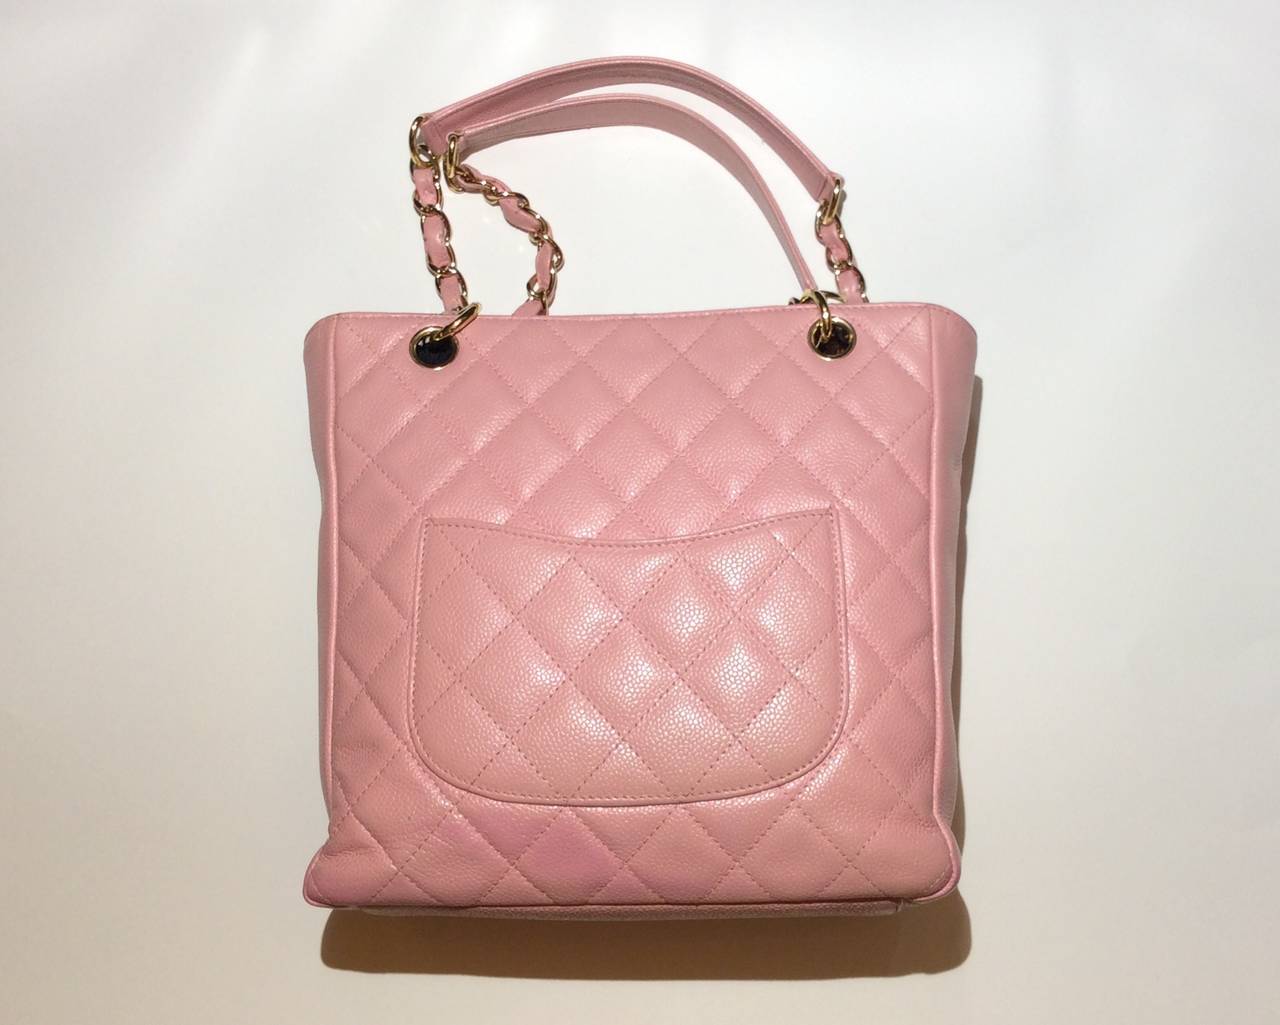 This is a sweet Chanel petite shopper with pink quilted caviar leather tote with 2 shoulder straps and gold hardware.
Measurements:
10